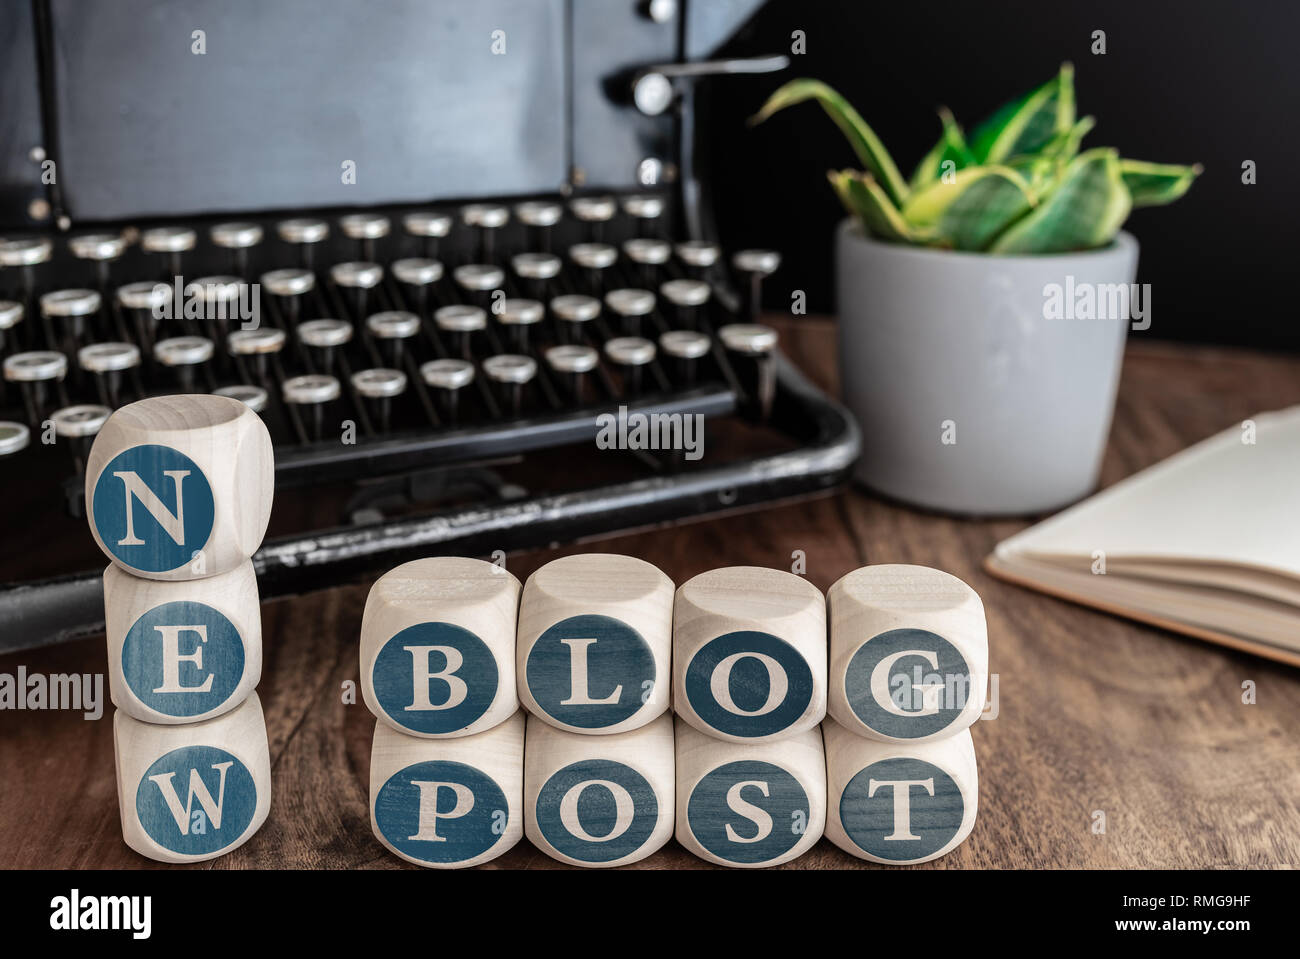 words NEW BLOG POST on wooden blocks against vintage typewriter, potted plant and note pad on table. Stock Photo